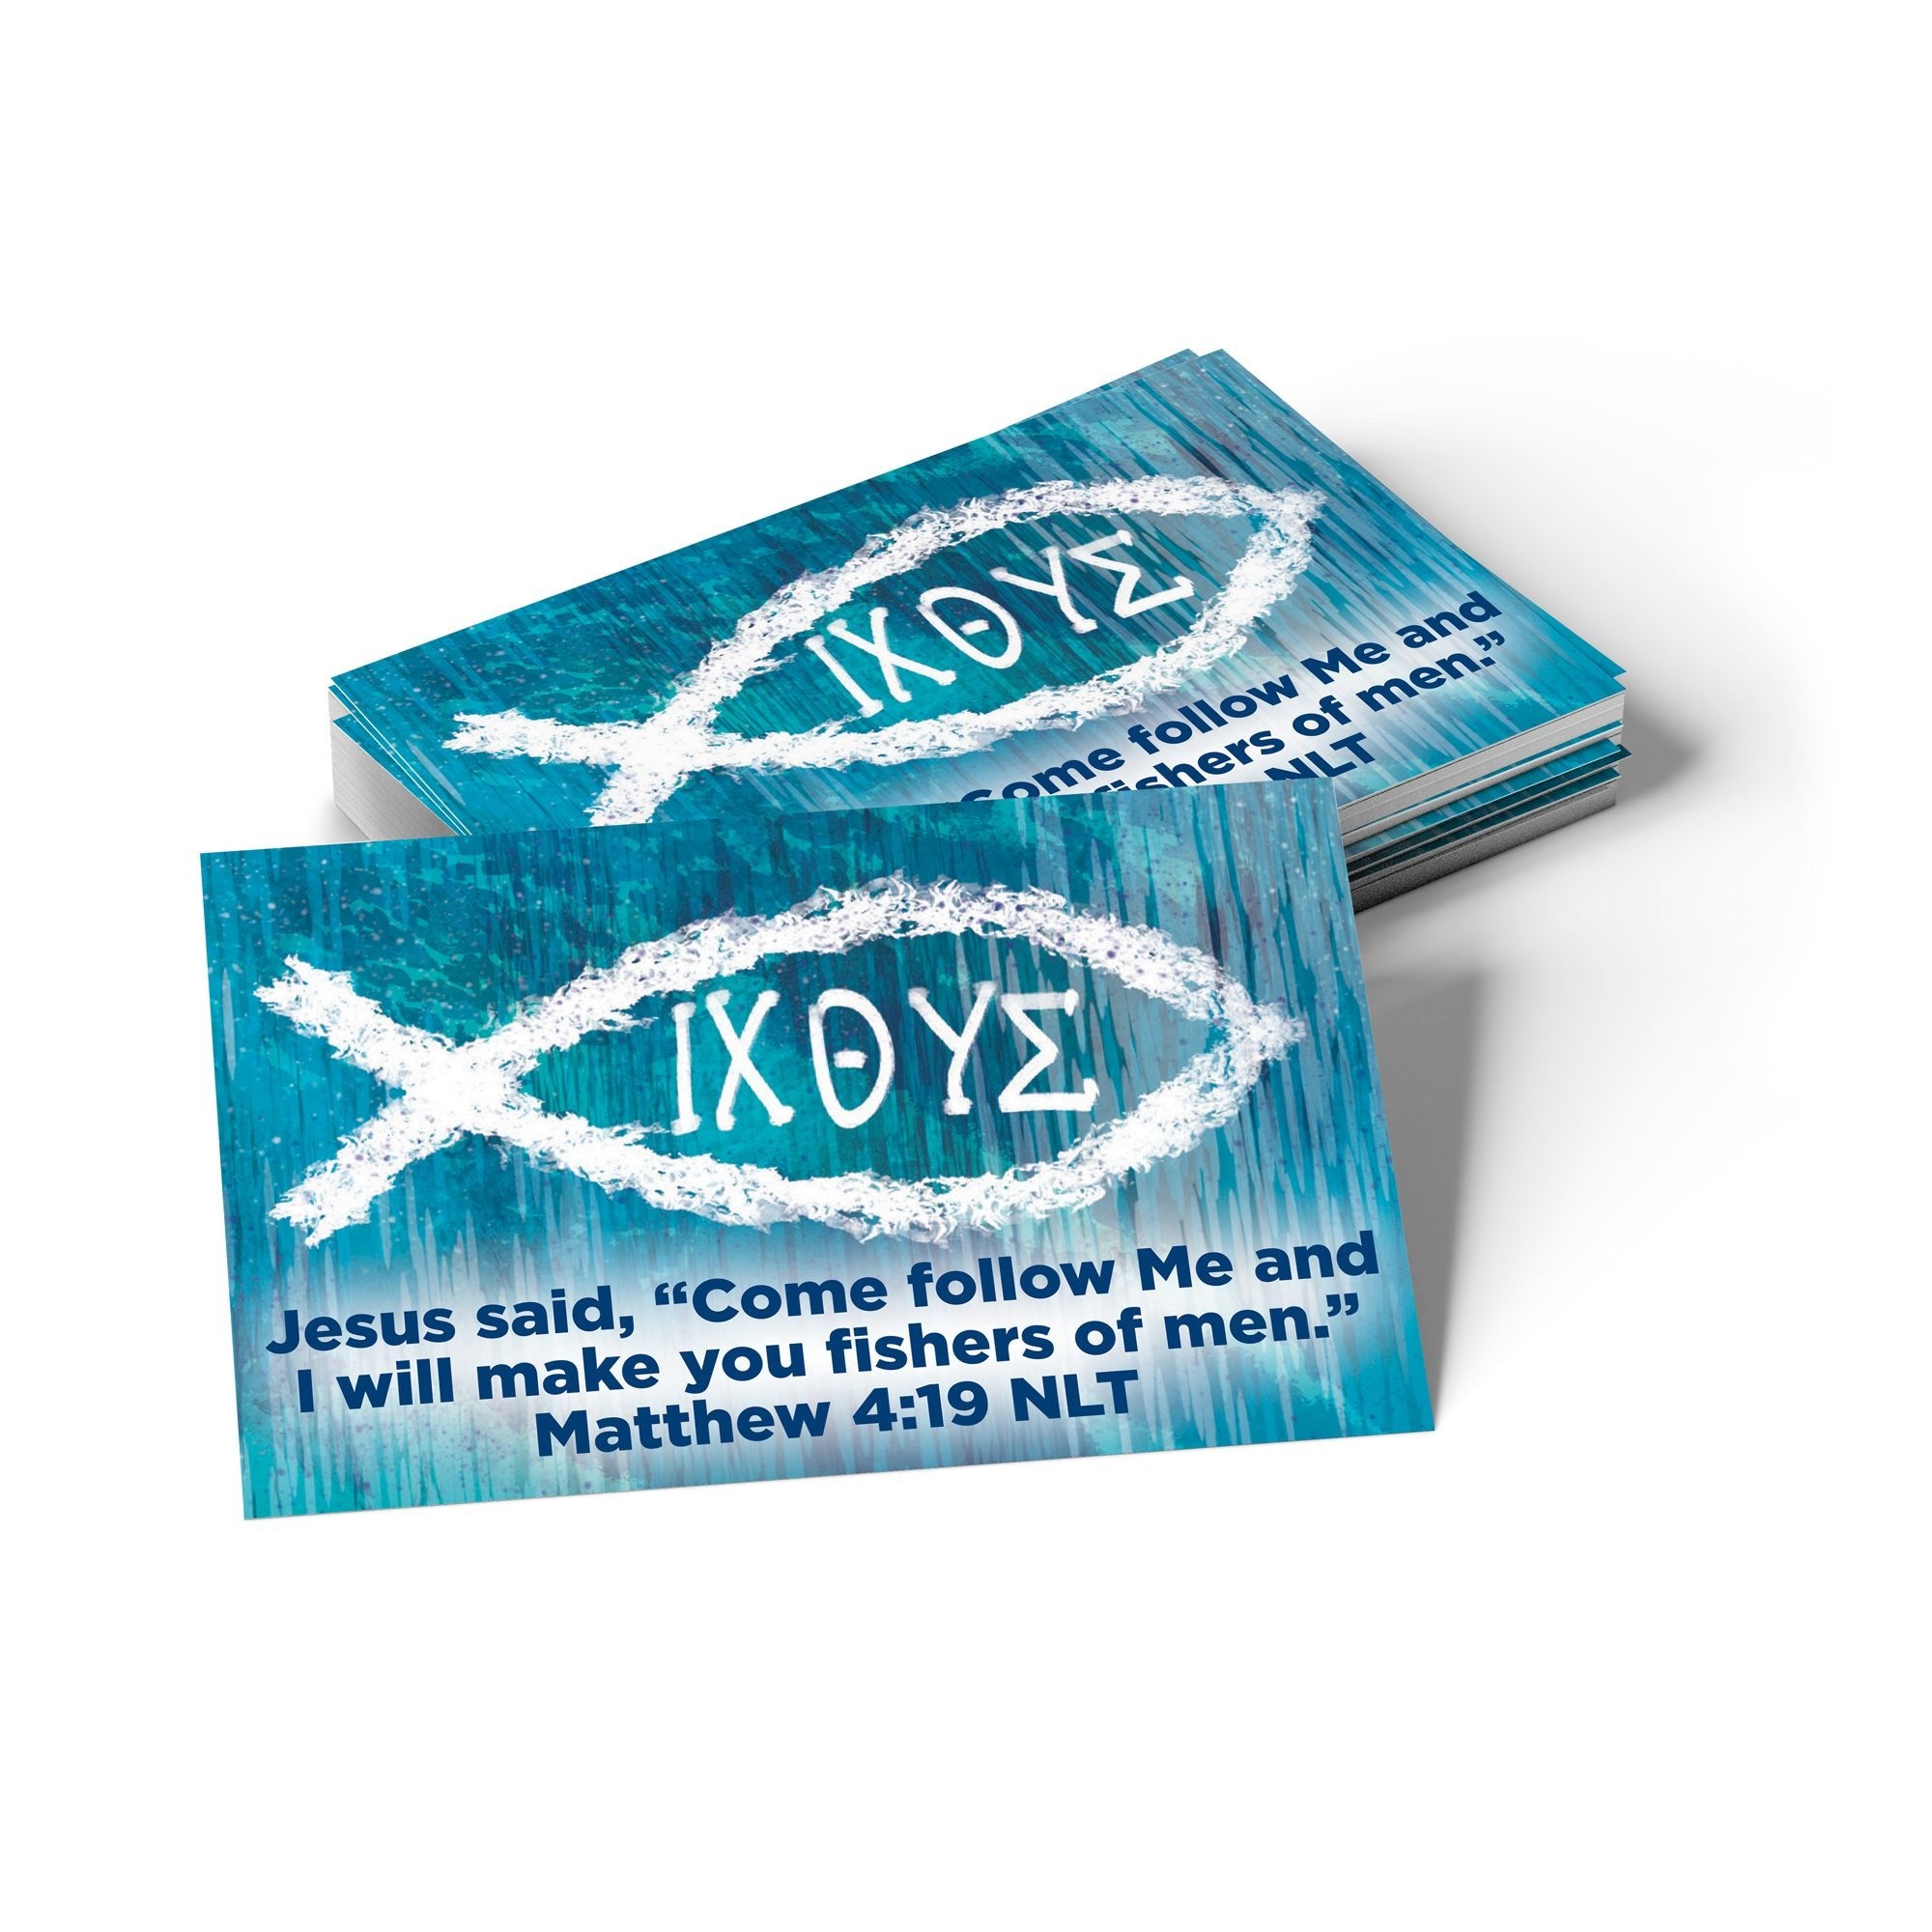 Children and Youth, Pass Along Scripture Cards, Christian Fish, ICHTHUS, Come follow me, Matthew 4:19, Pack of 25